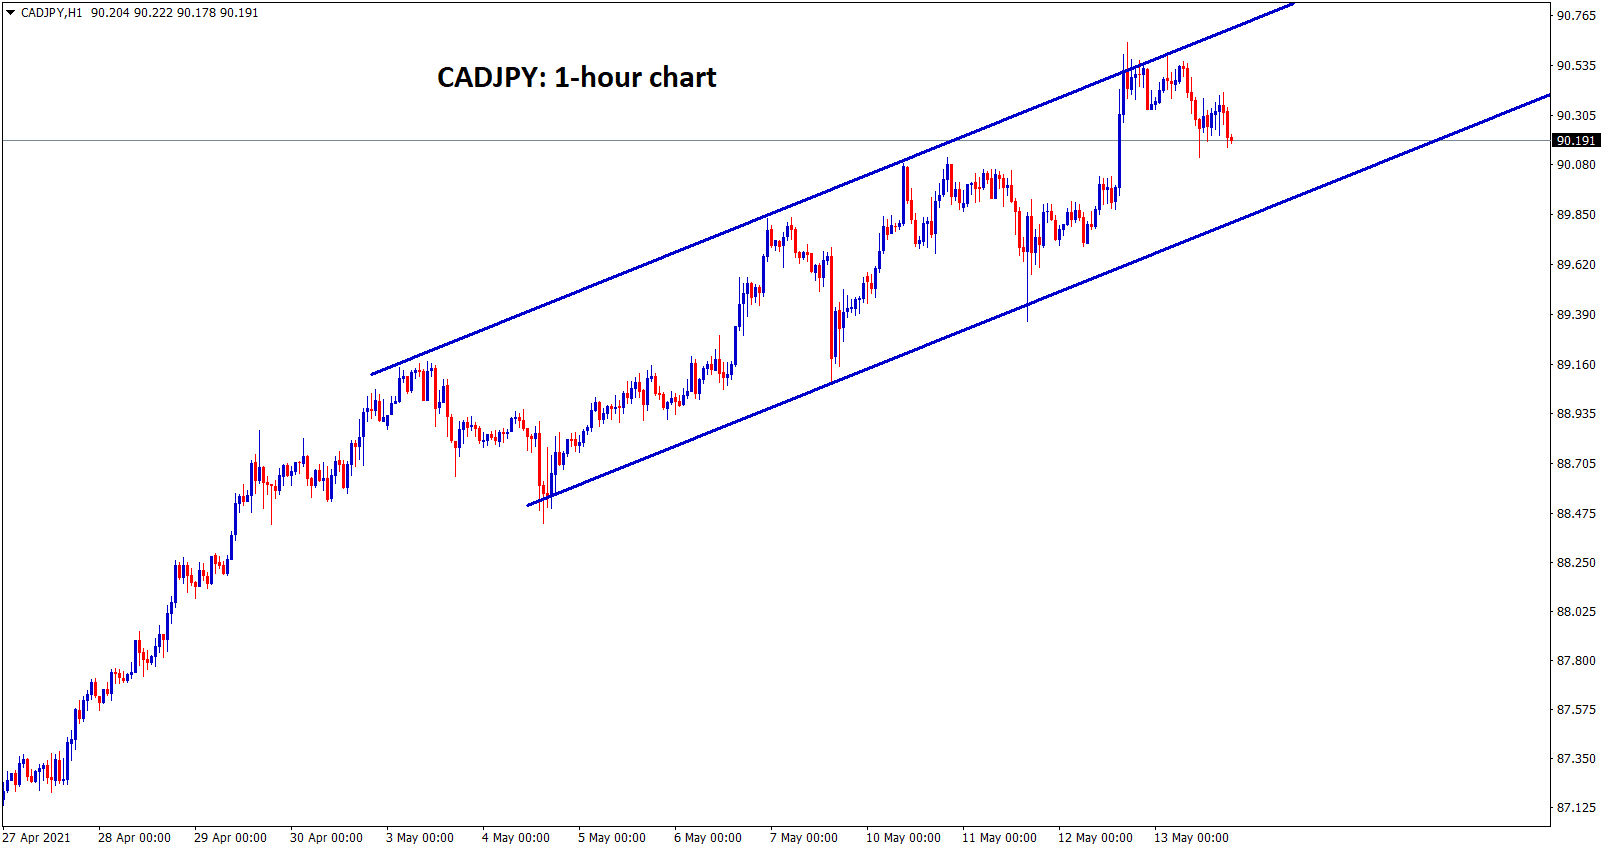 CADJPY is moving in an ascending channel in 1 hour chart. wait for breakout from this channel range.